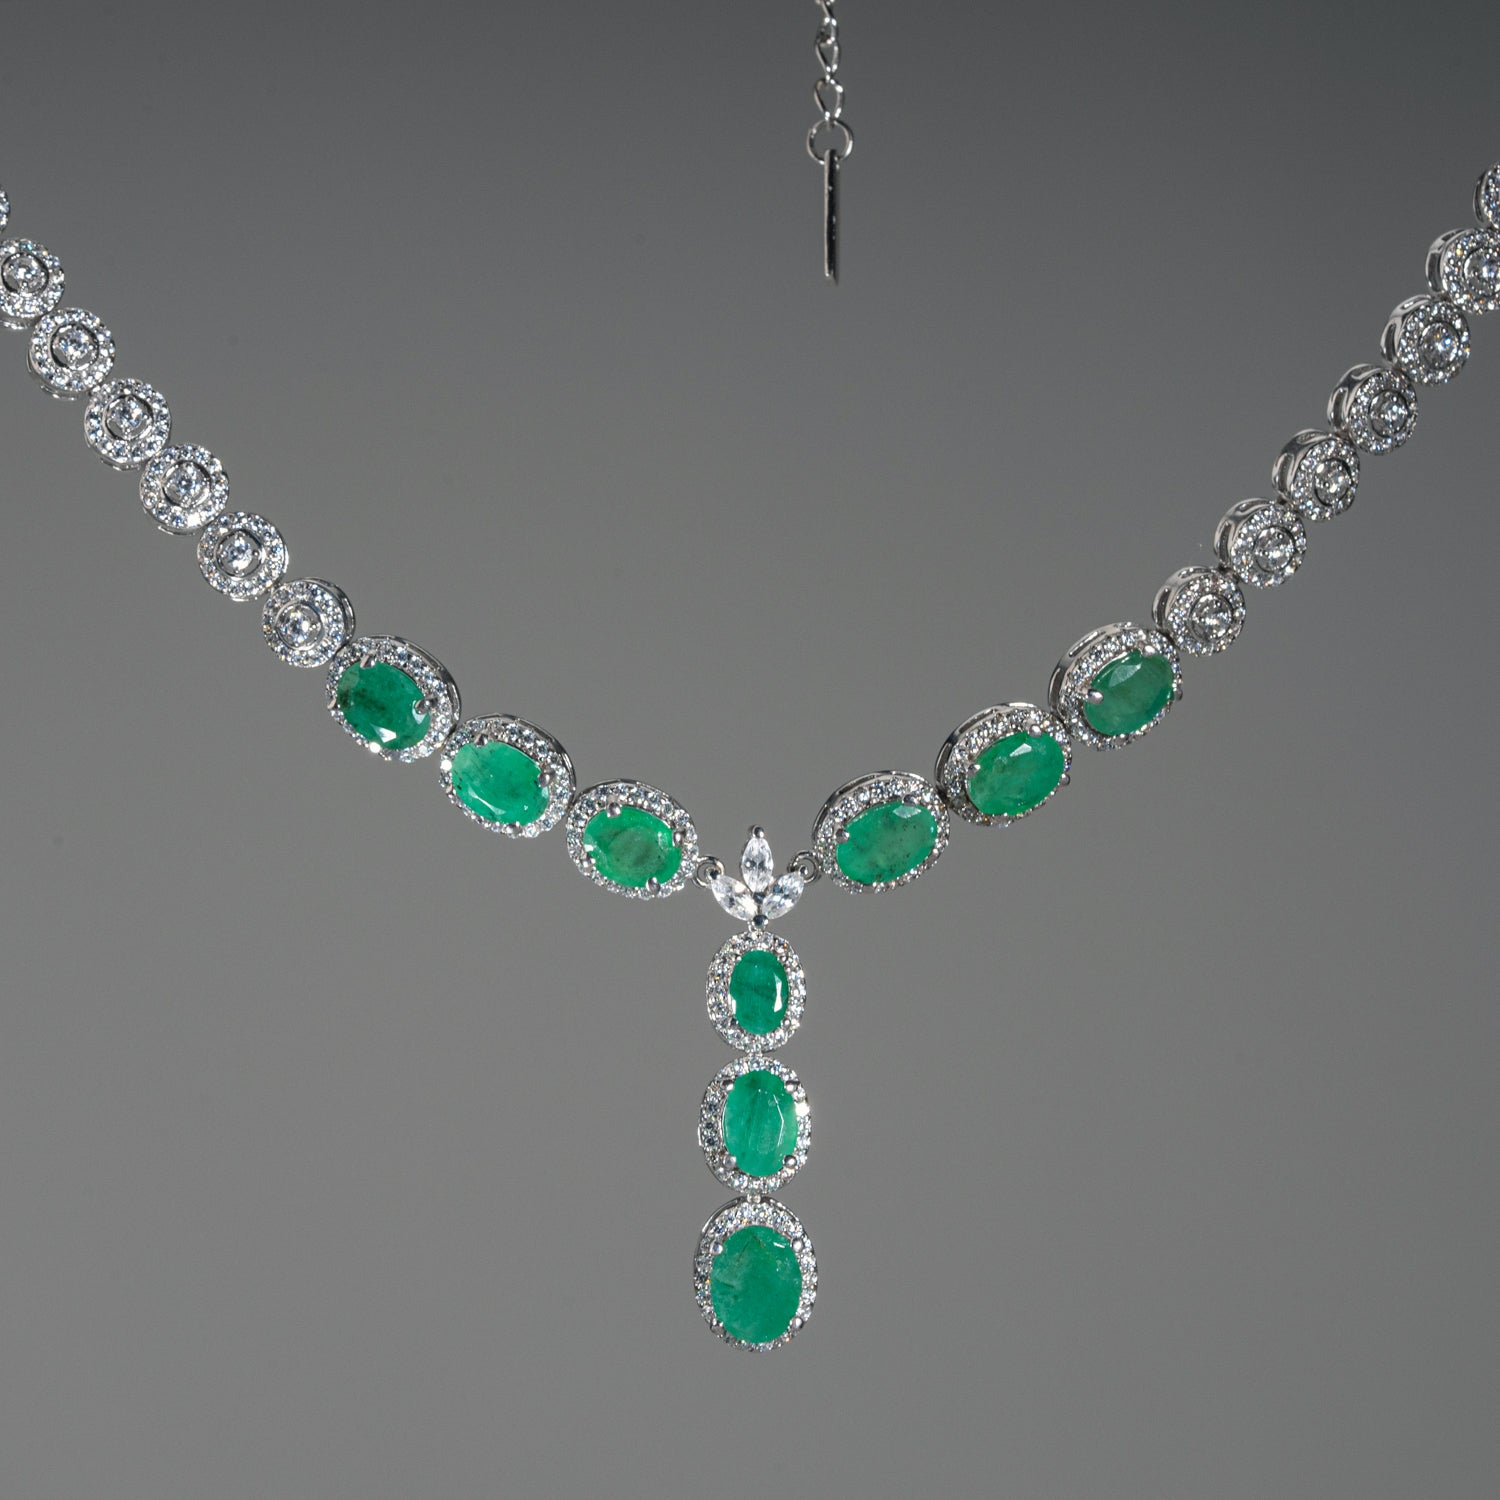 Emerald 8x6mm with Cz 14k White Gold Plated Sterling Silver 18 inch Necklace